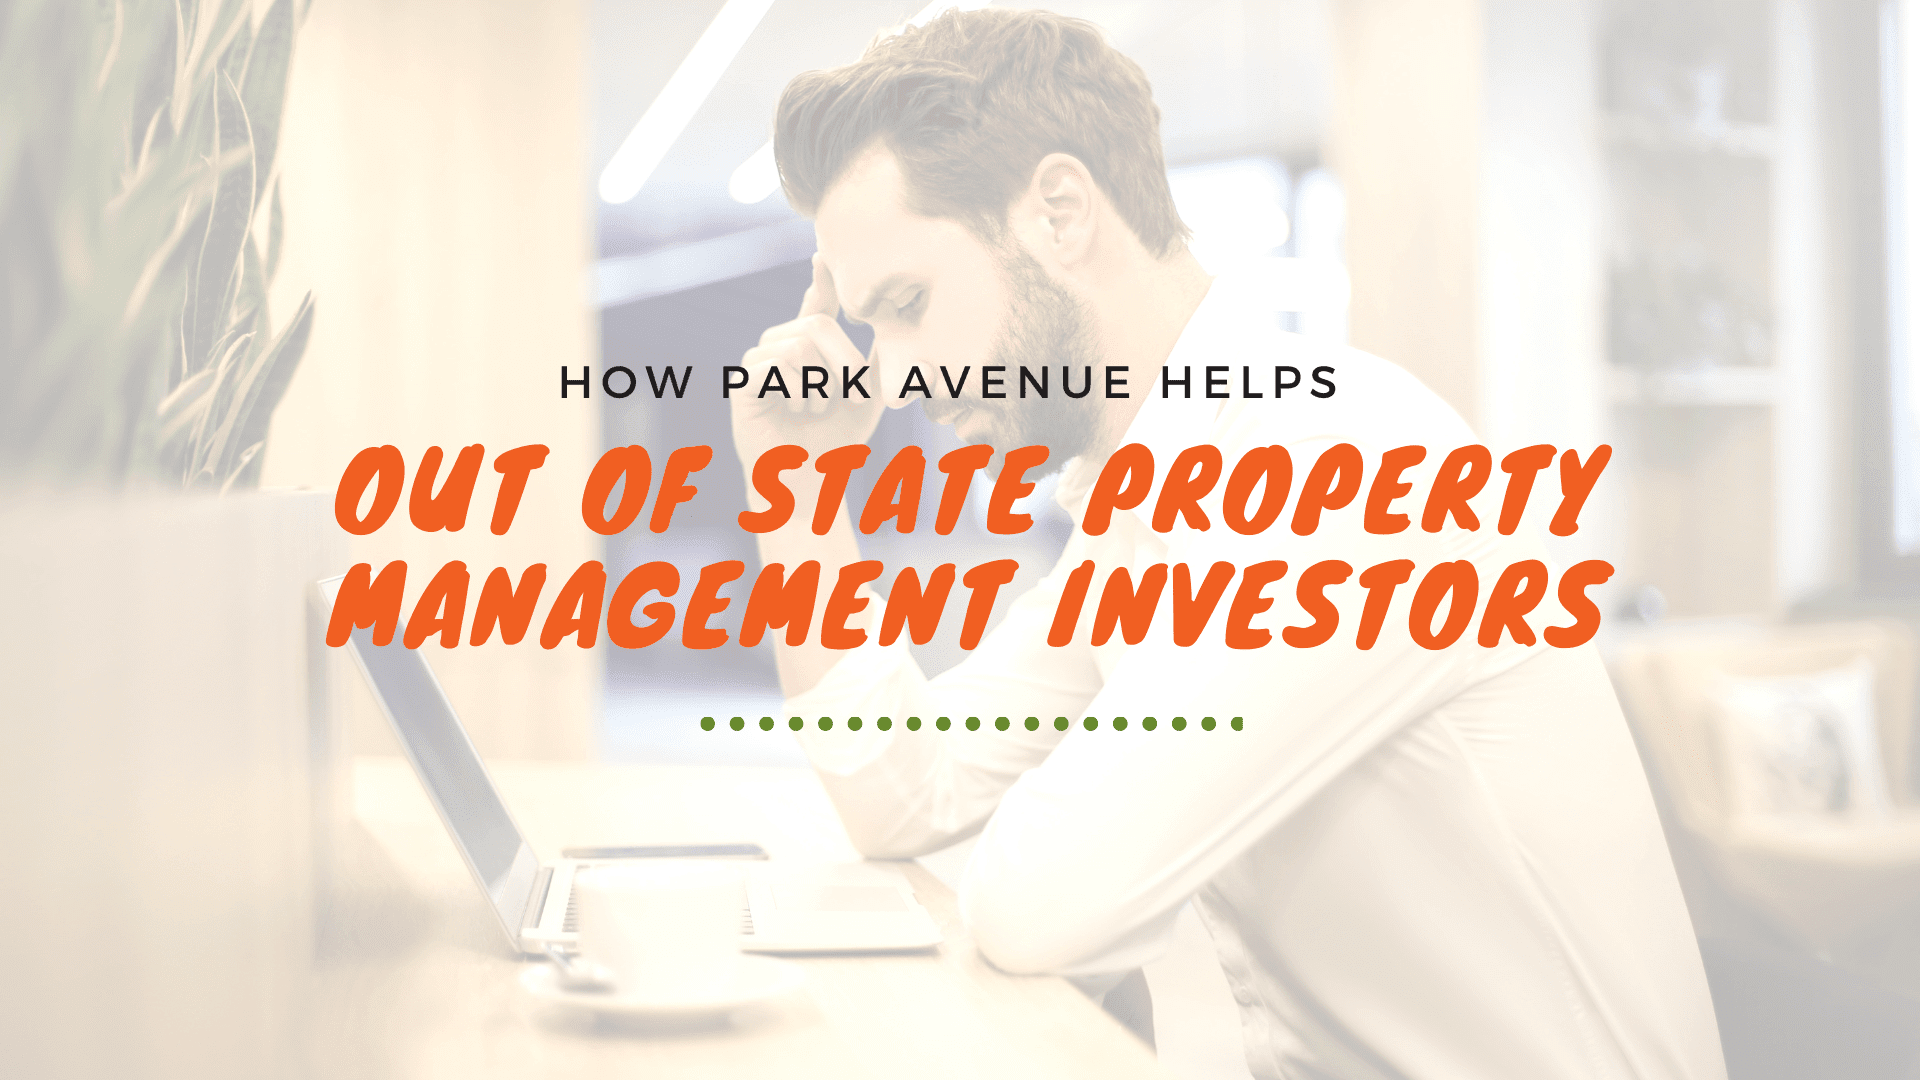 How Park Avenue Helps Out of State Property Management Investors